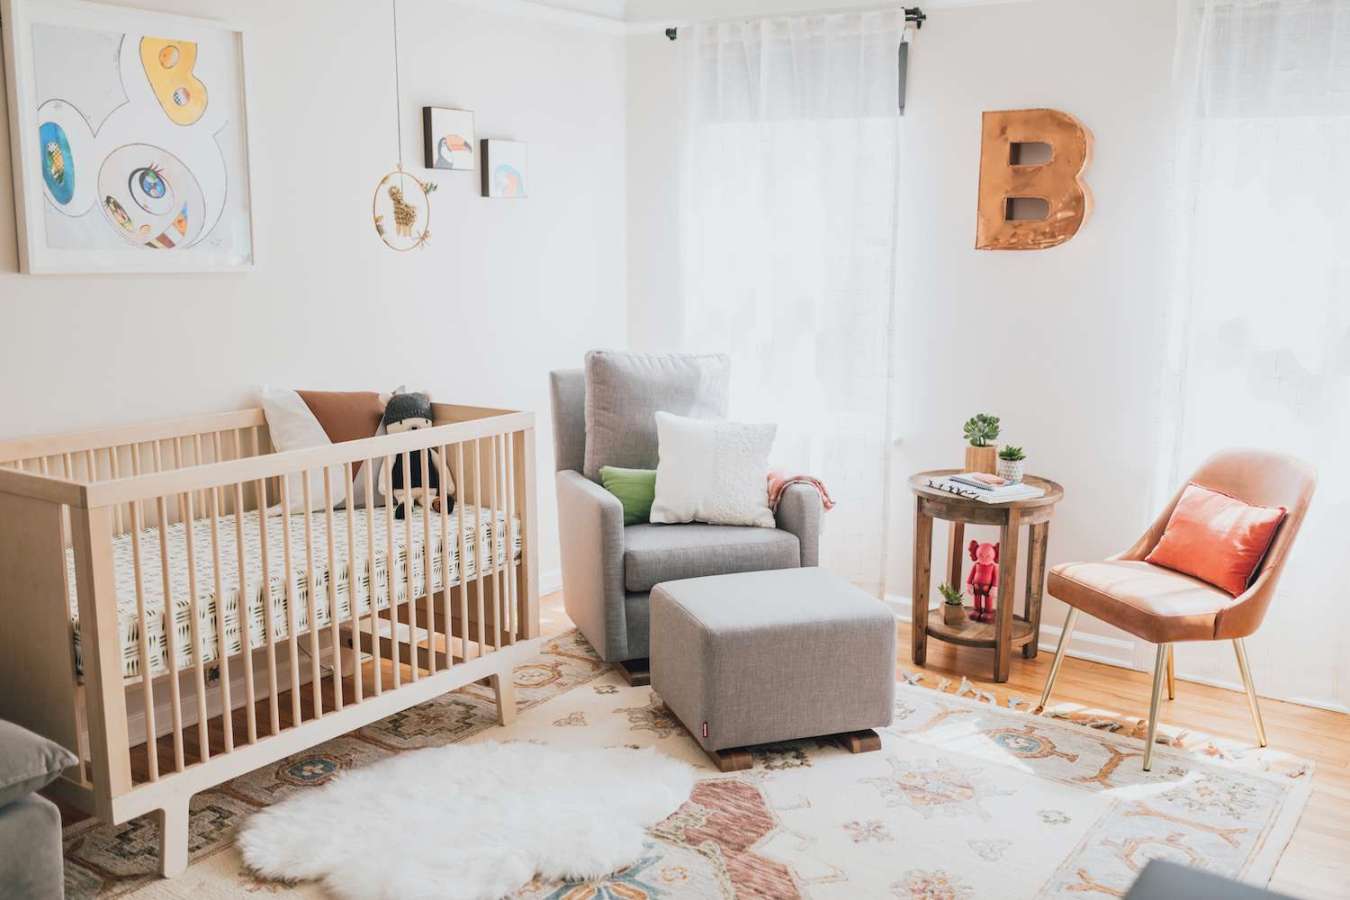 Baby Room Ideas for a Charming, Functional Nursery